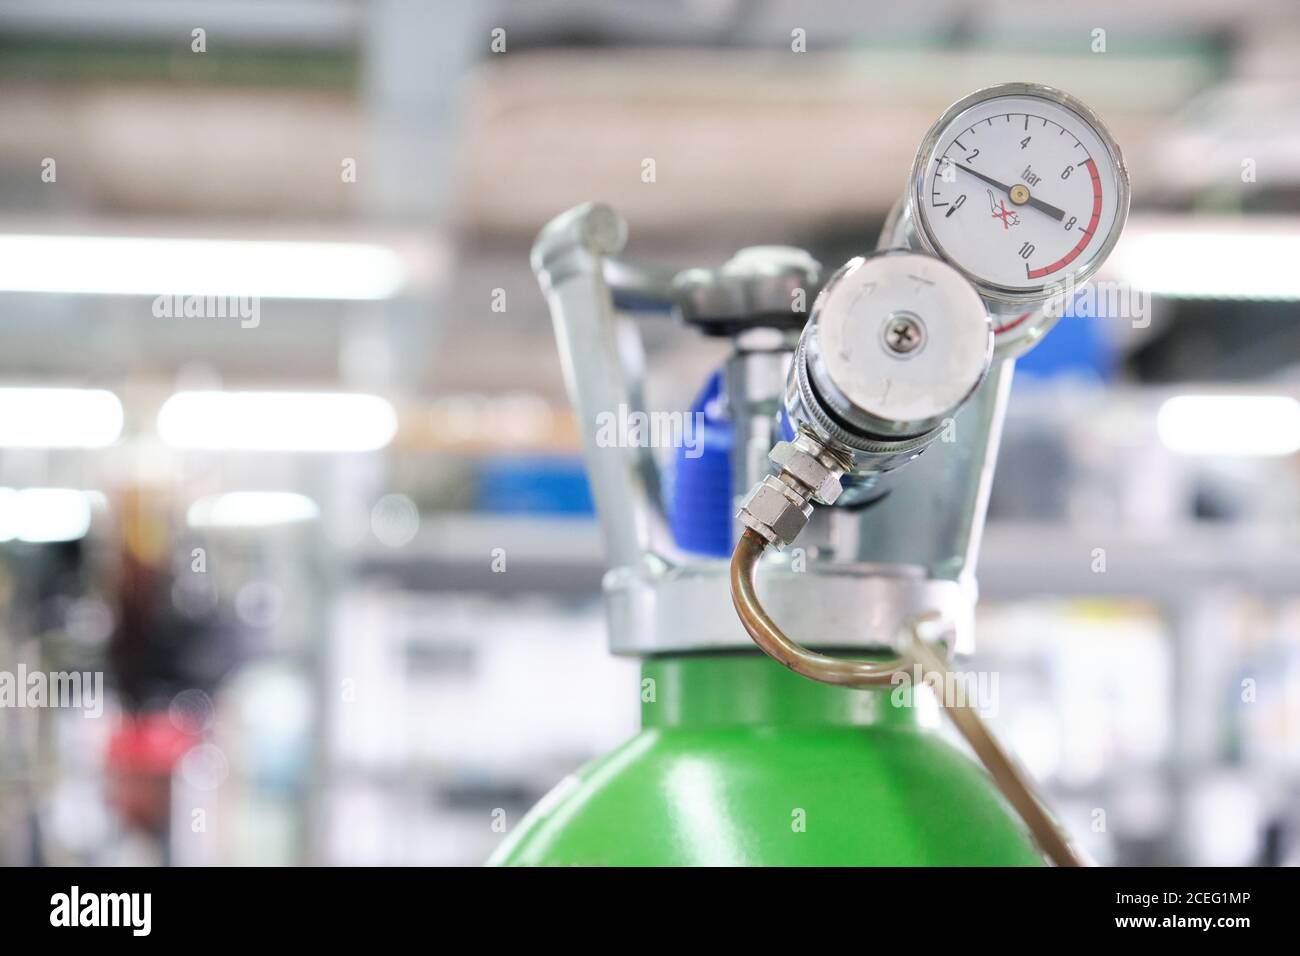 Gas cylinders with pressure gauge in a specialized laboratory. Laboratory material. Stock Photo